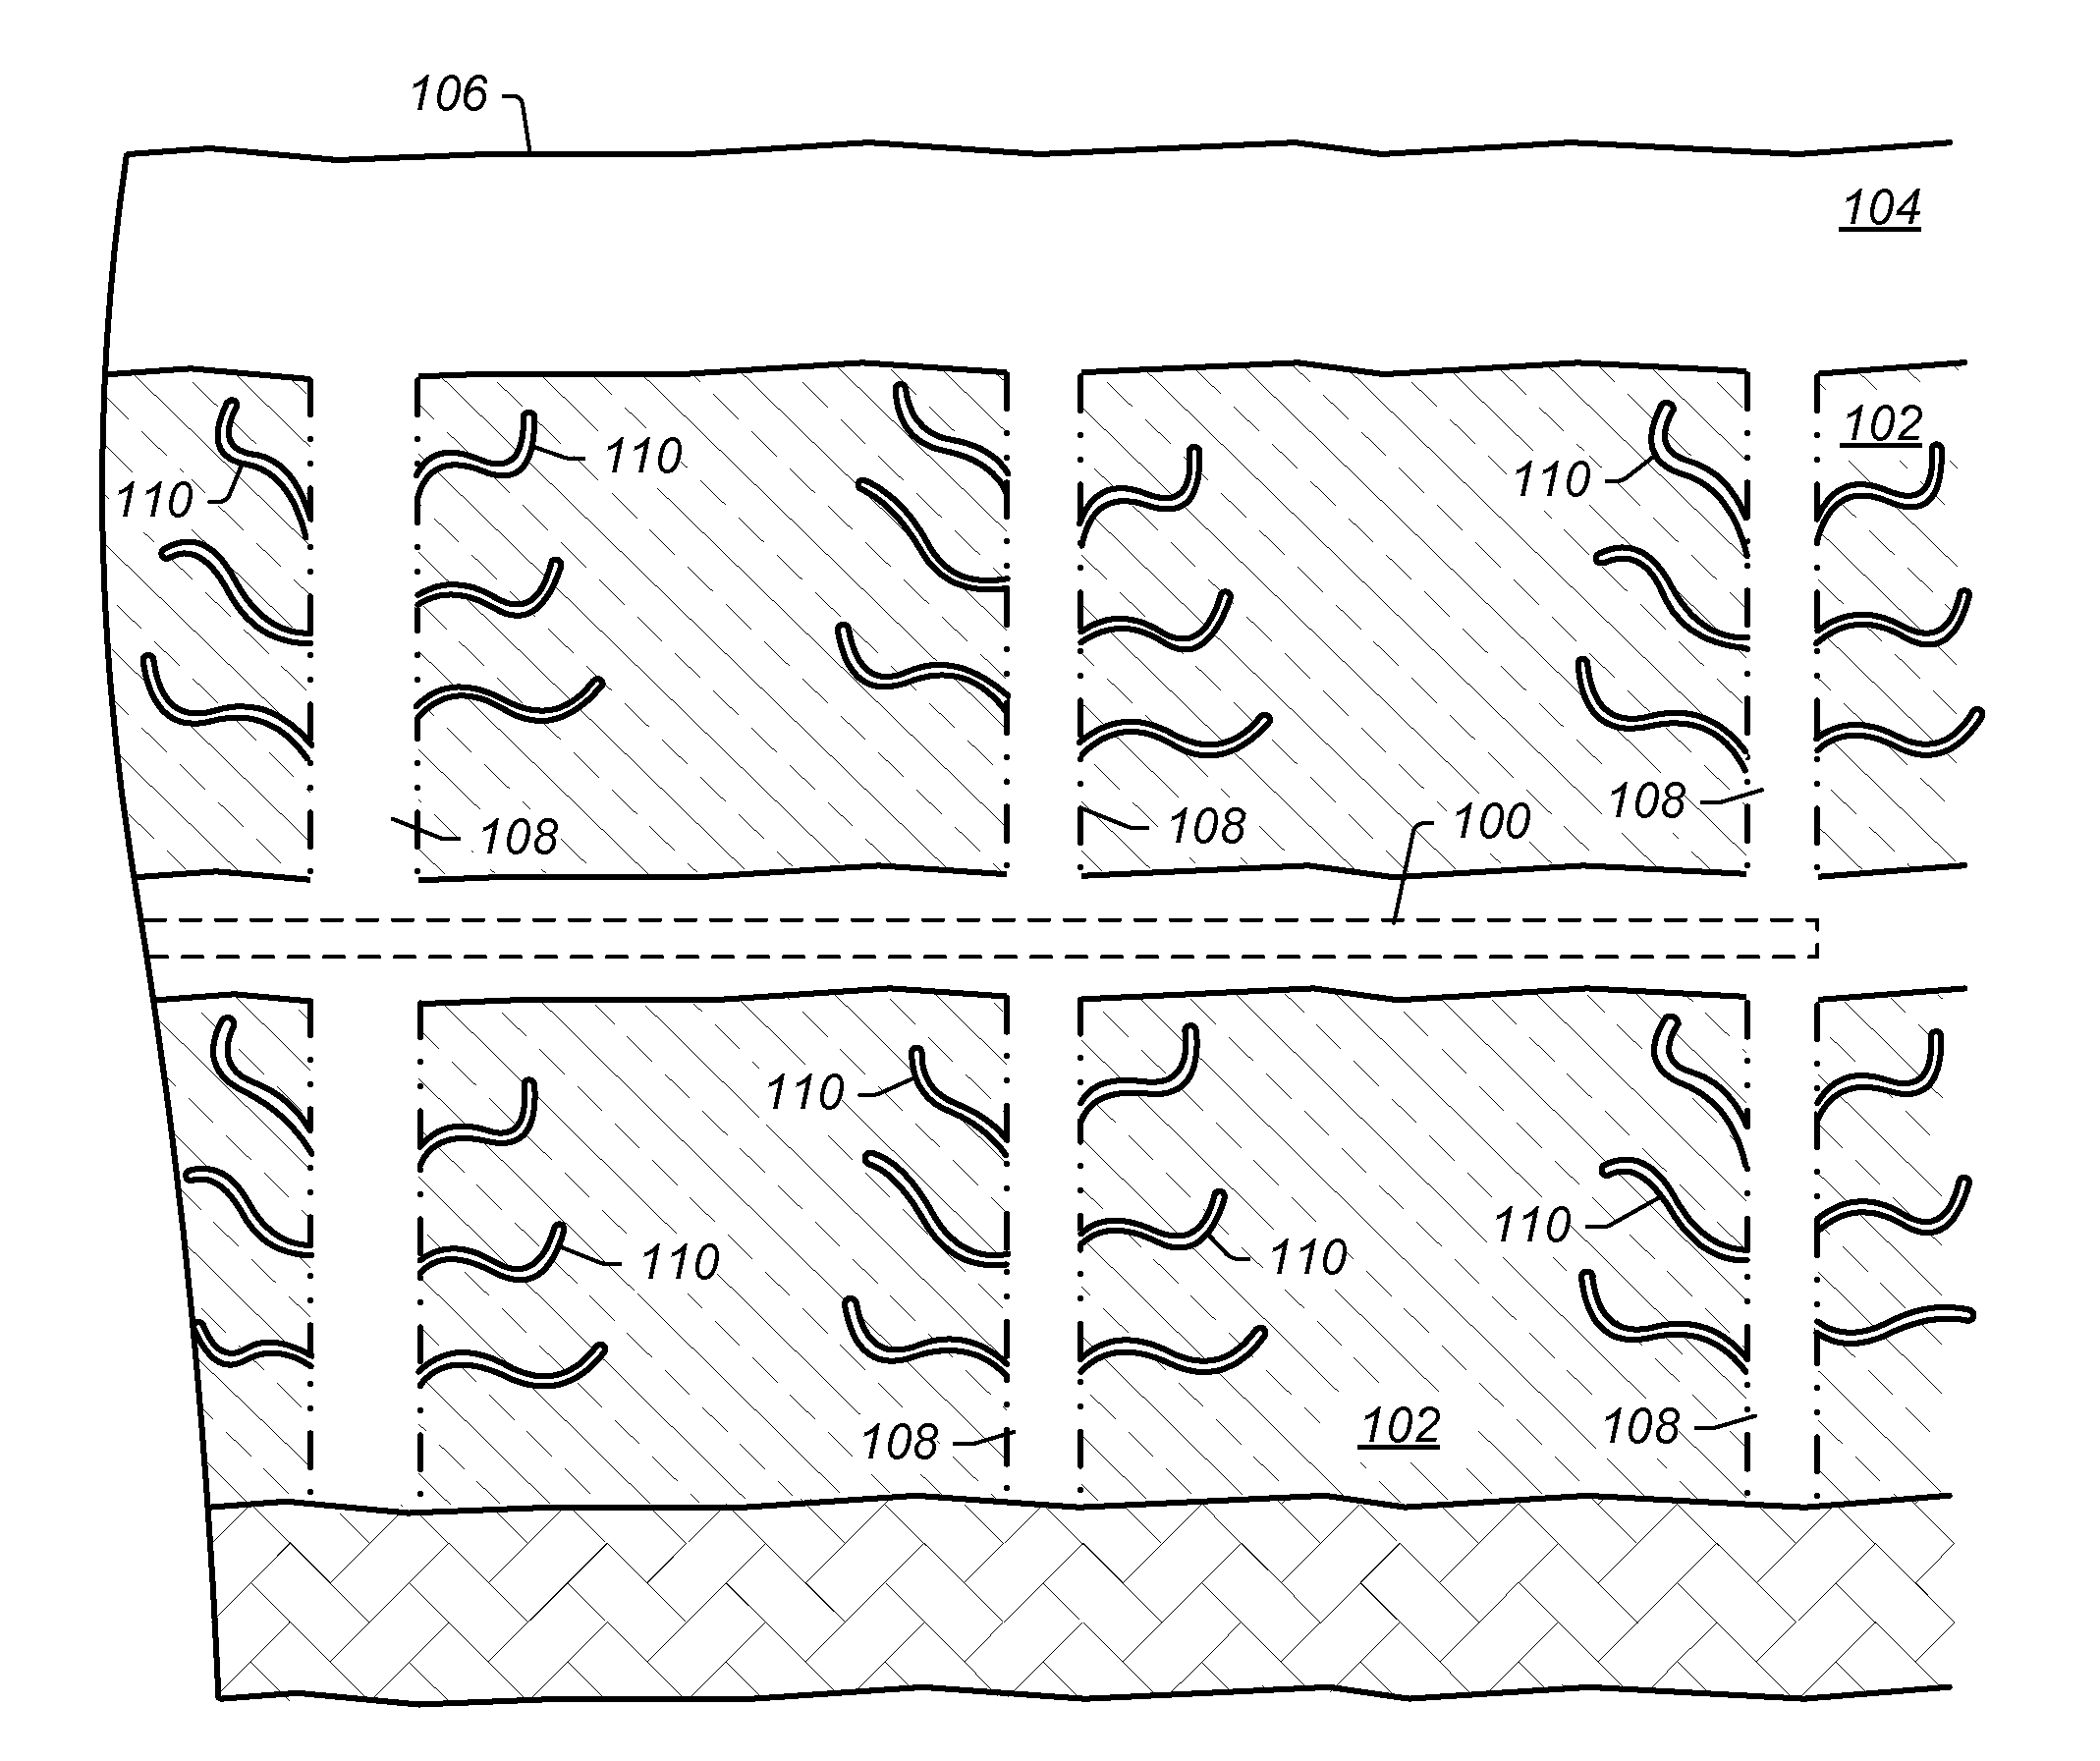 System and methods for treating subsurface formations containing fractures